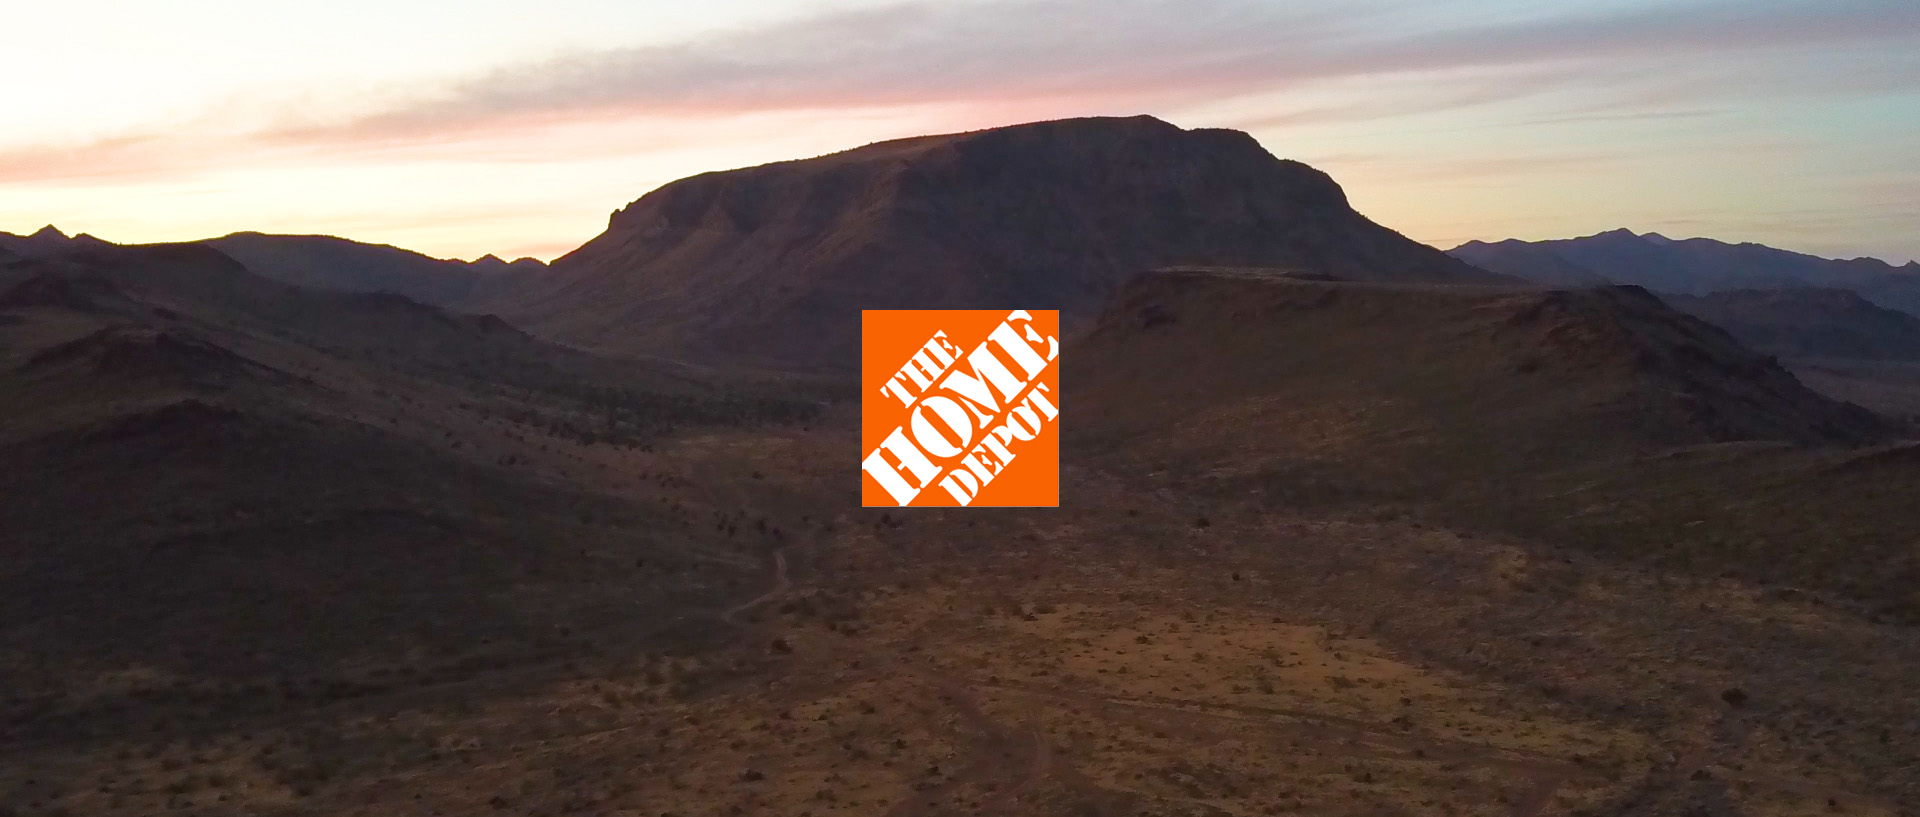 Featured image for “Home Depot”